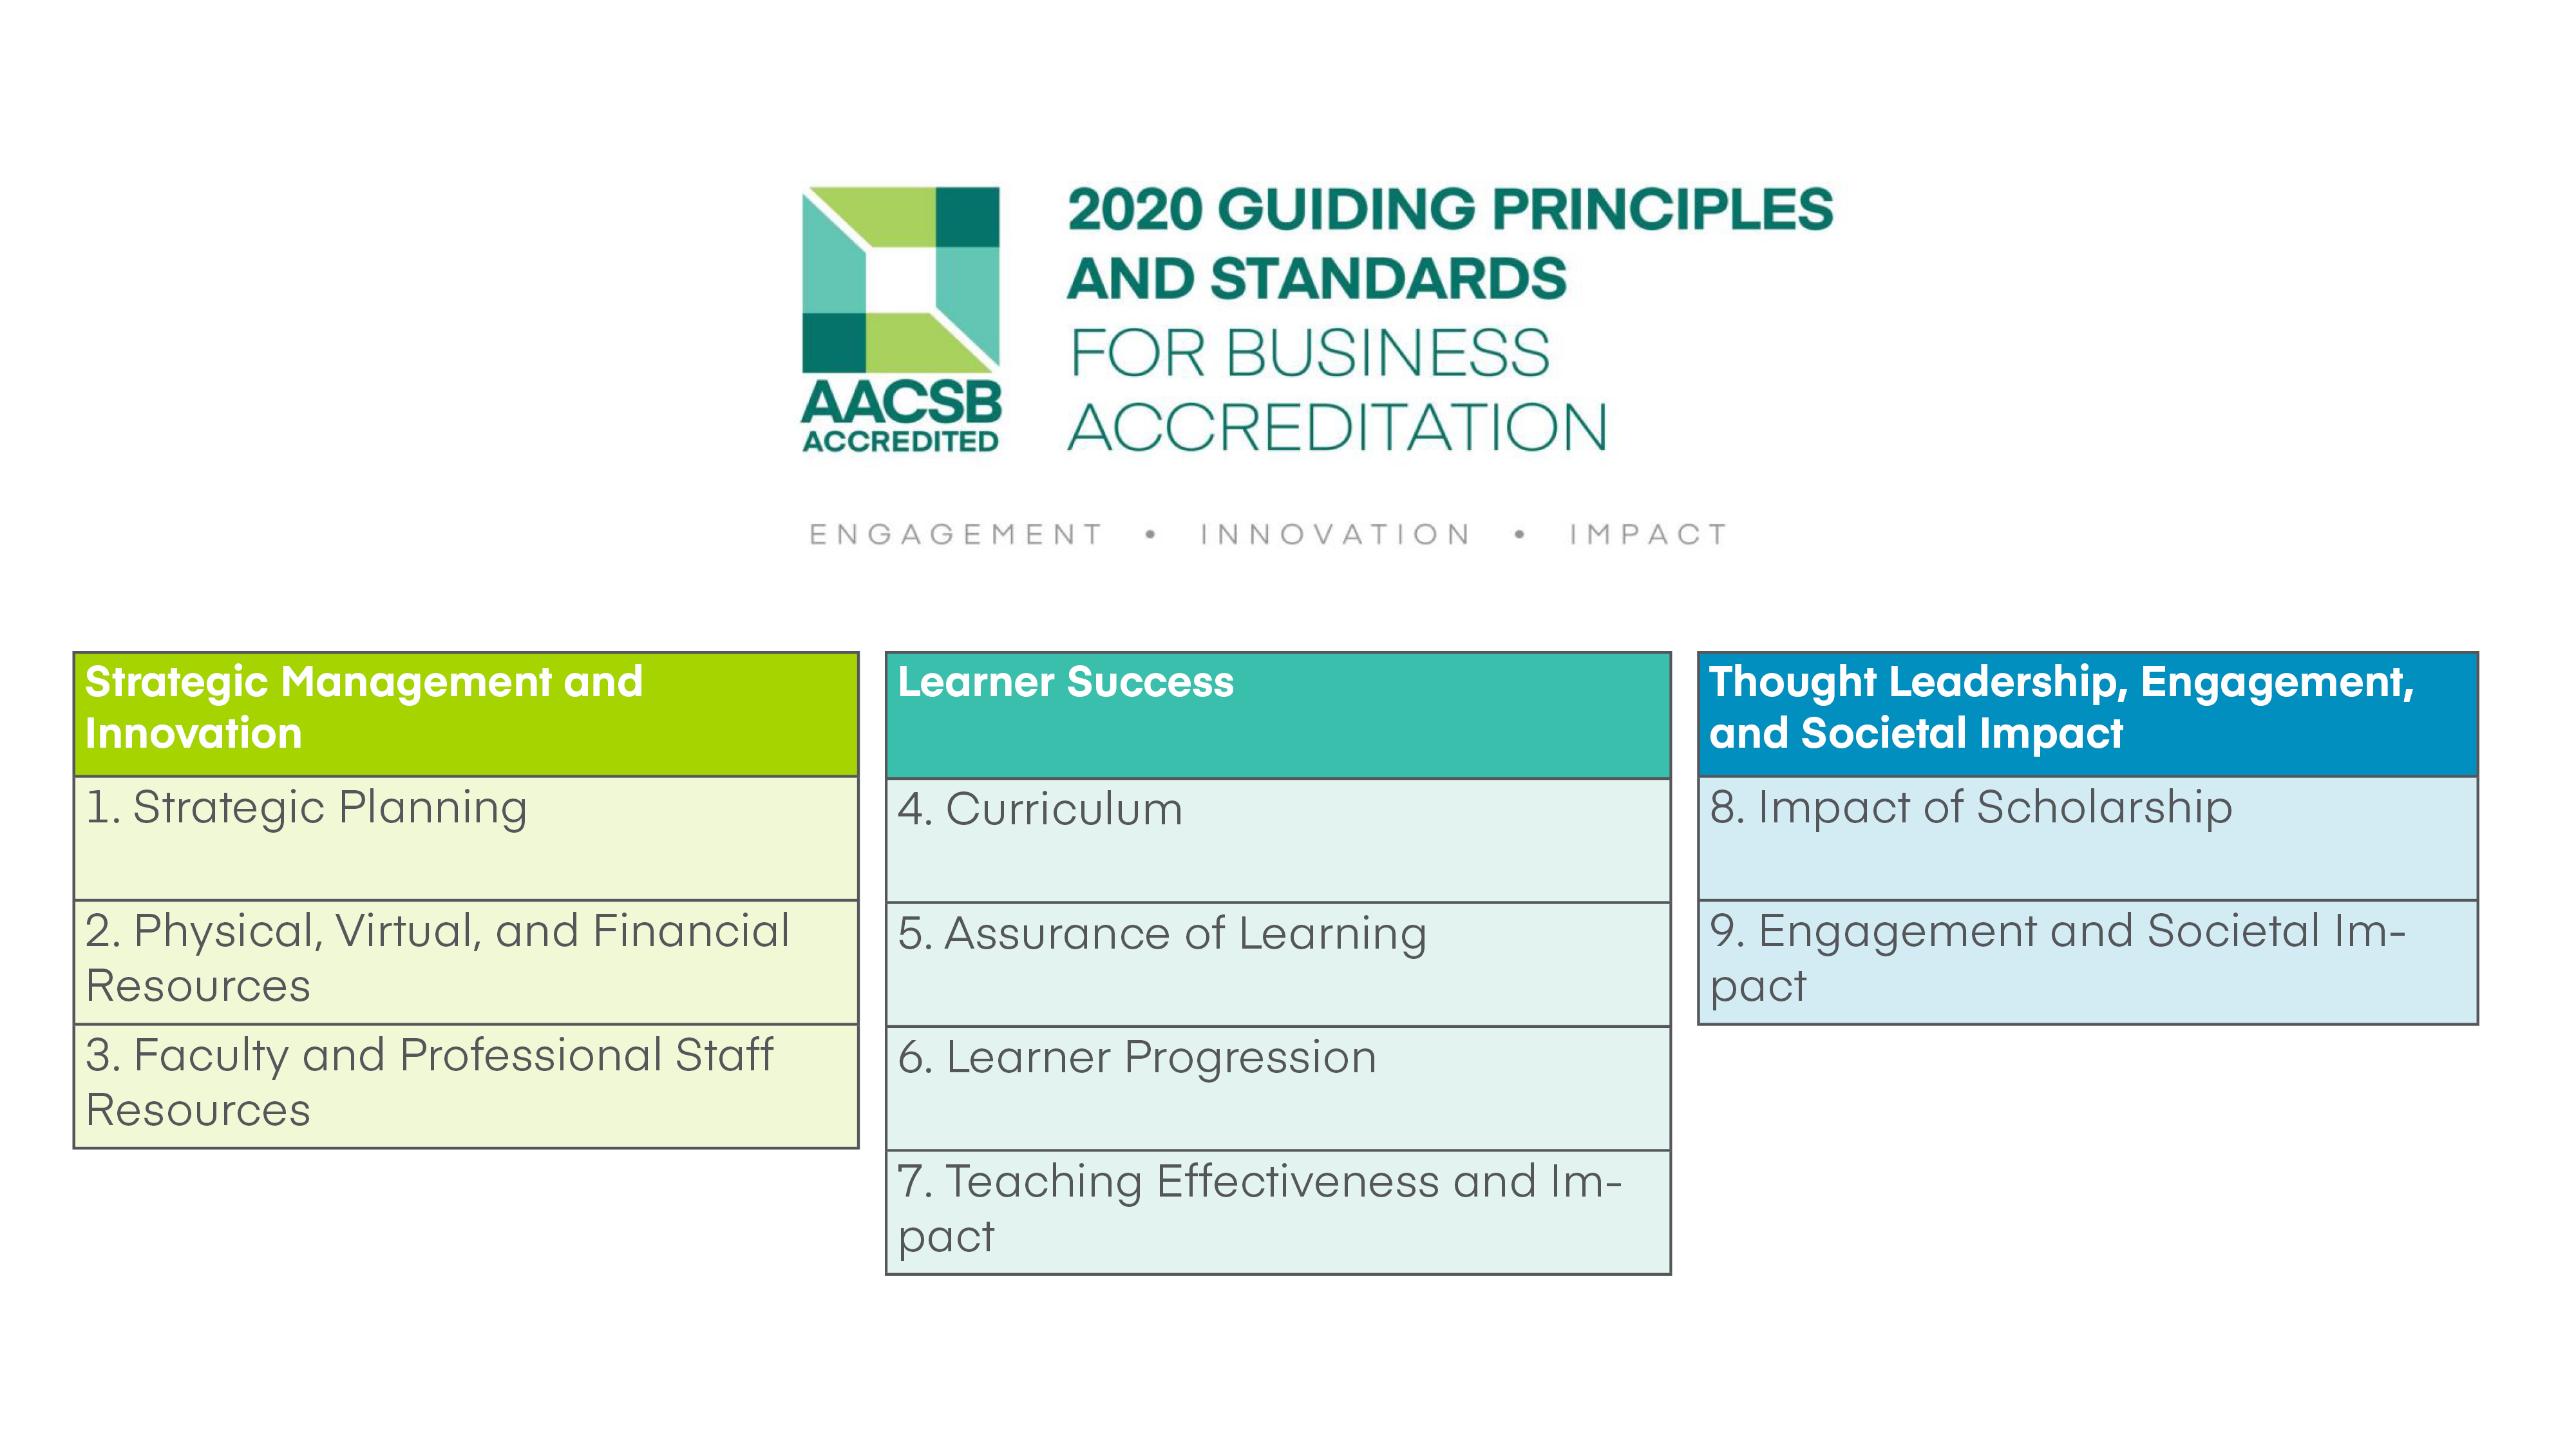 AACSB 2020 Business Accreditation Guiding Principles and Standards